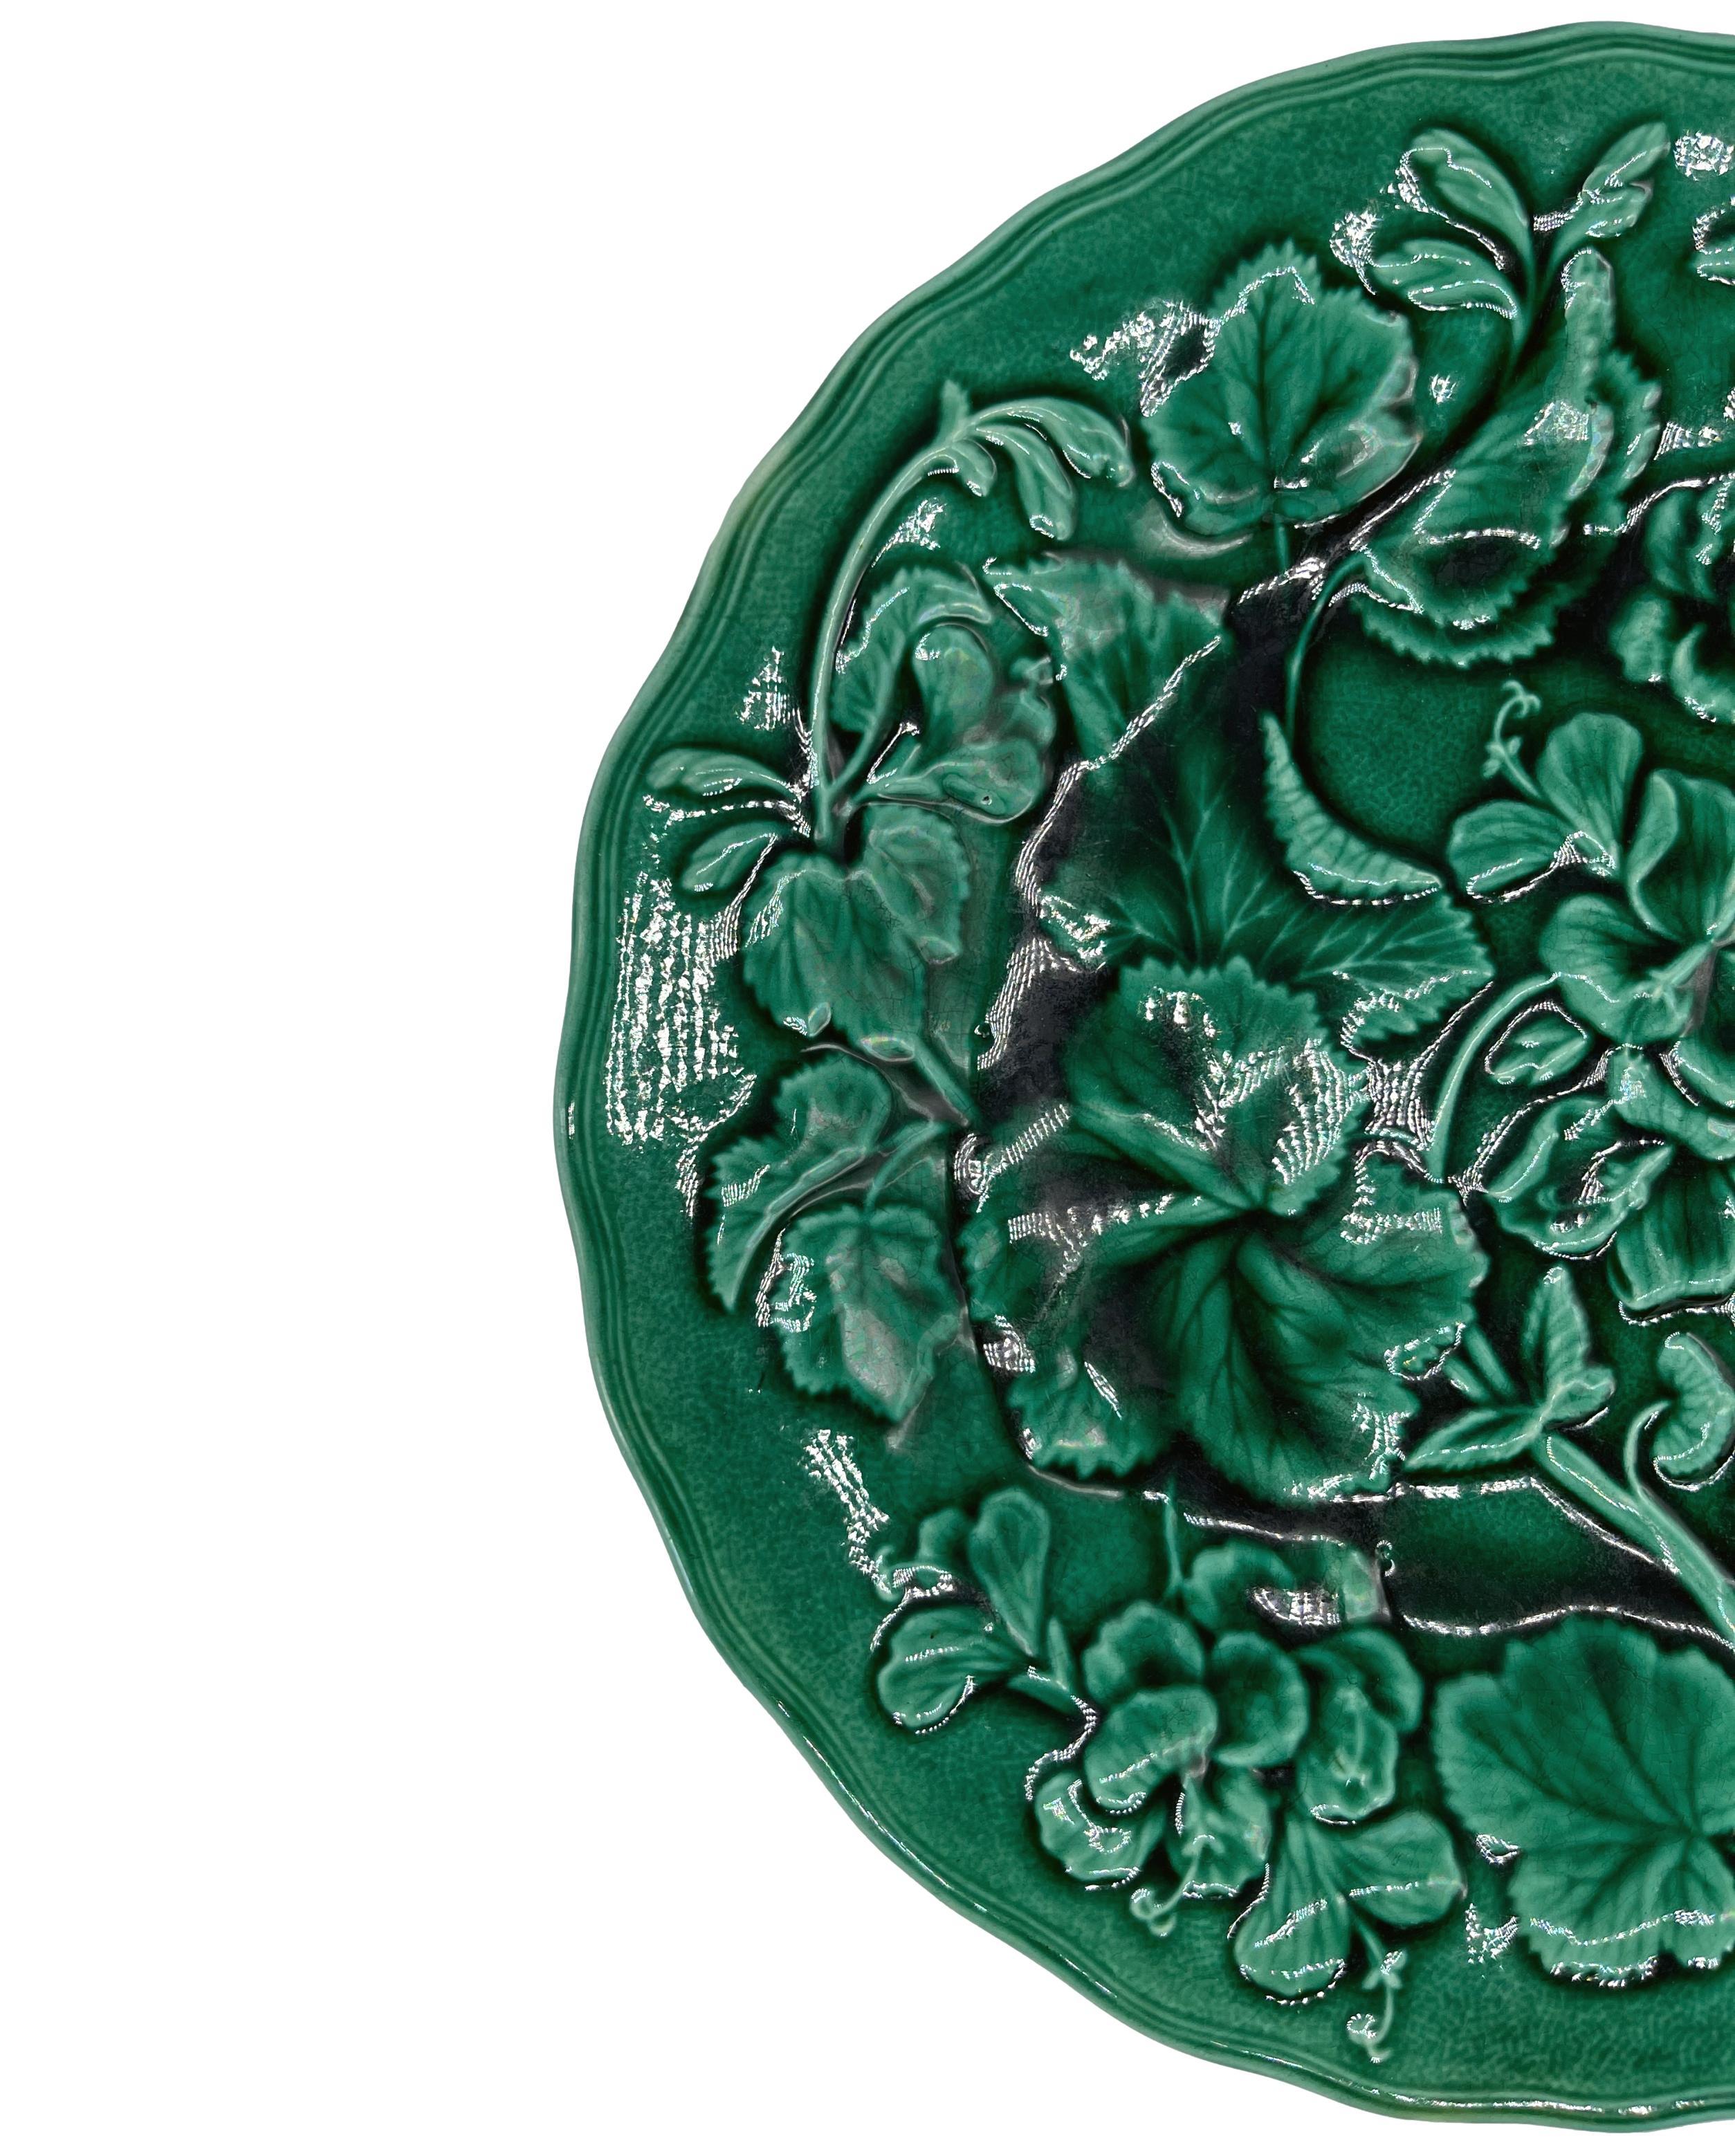 English majolica green-glazed 9.13-inch plate, with relief molded geranium plants and blossoms, with a shaped rim; the reverse with impressed mark: HOPE & CARTER, BURSLEM. 
For thirty years we have been among the preeminent specialists in fine